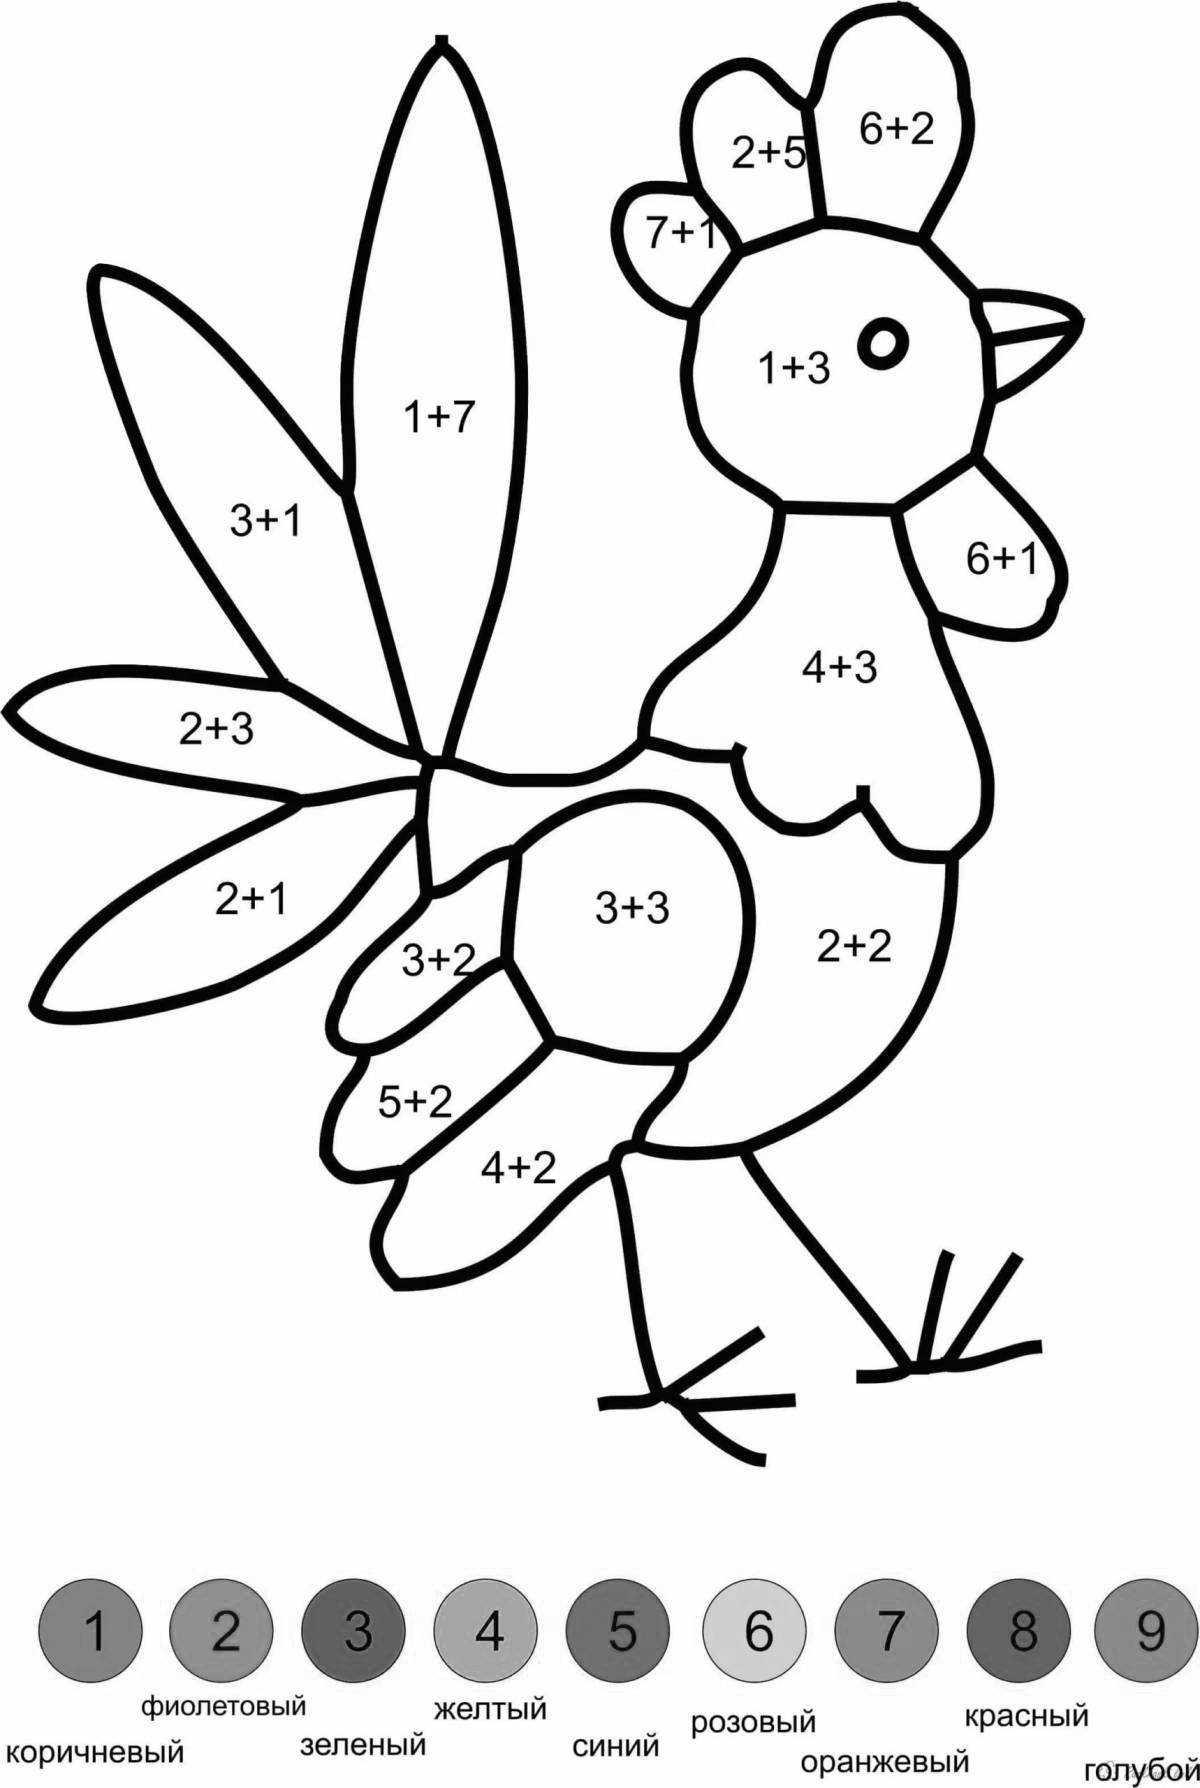 Colorful math coloring book with math examples for preschoolers